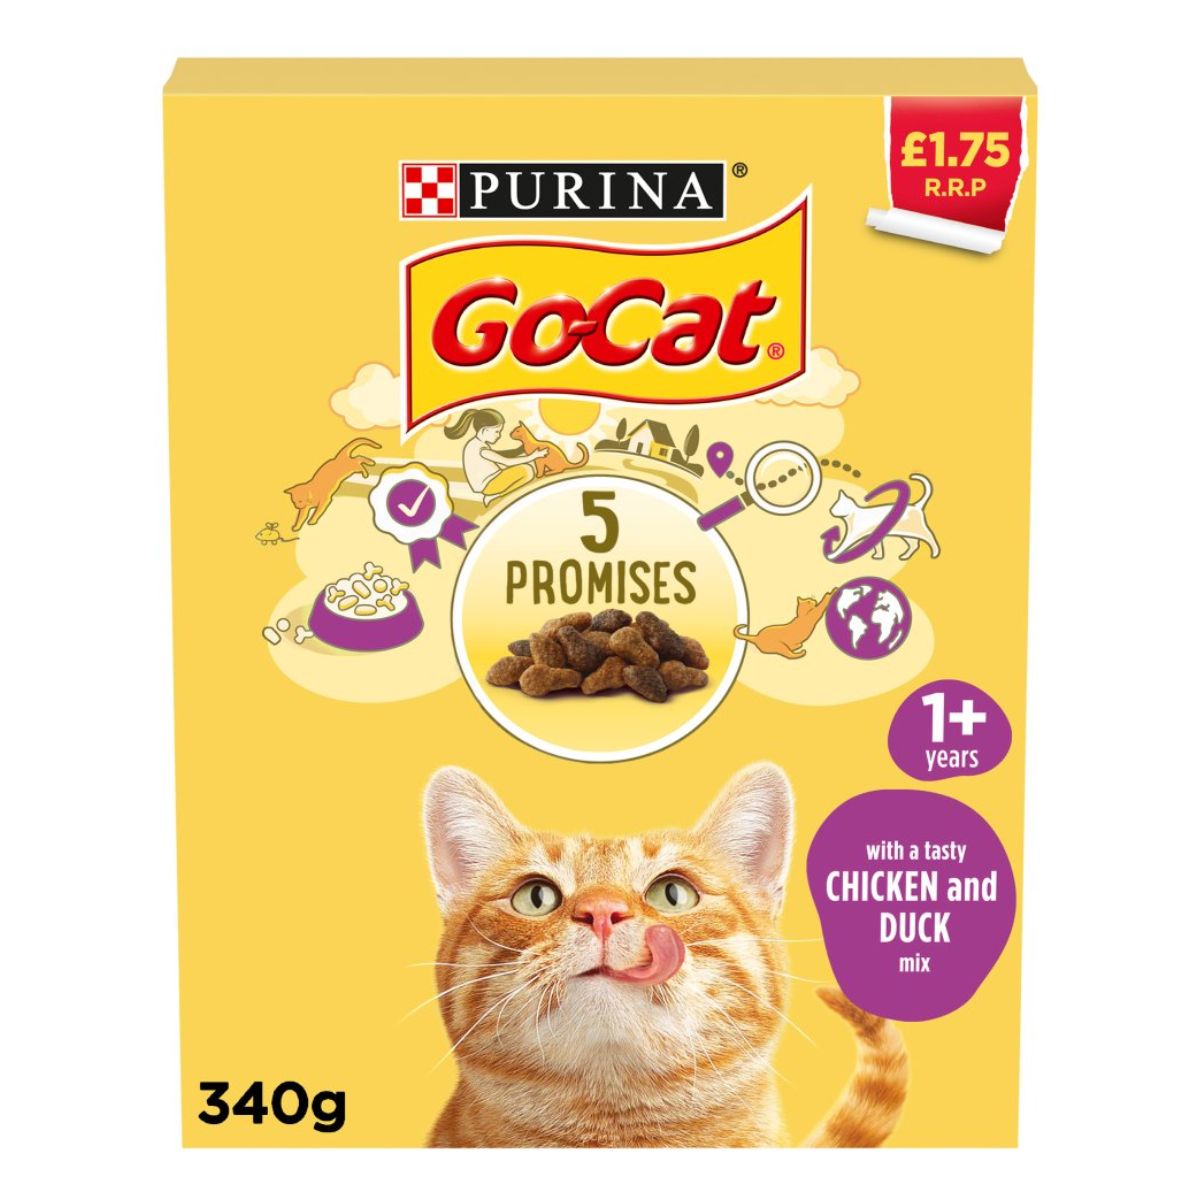 Purina Go-Cat with a Tasty Chicken and Duck Mix 1+ Years - 340g dry cat food.